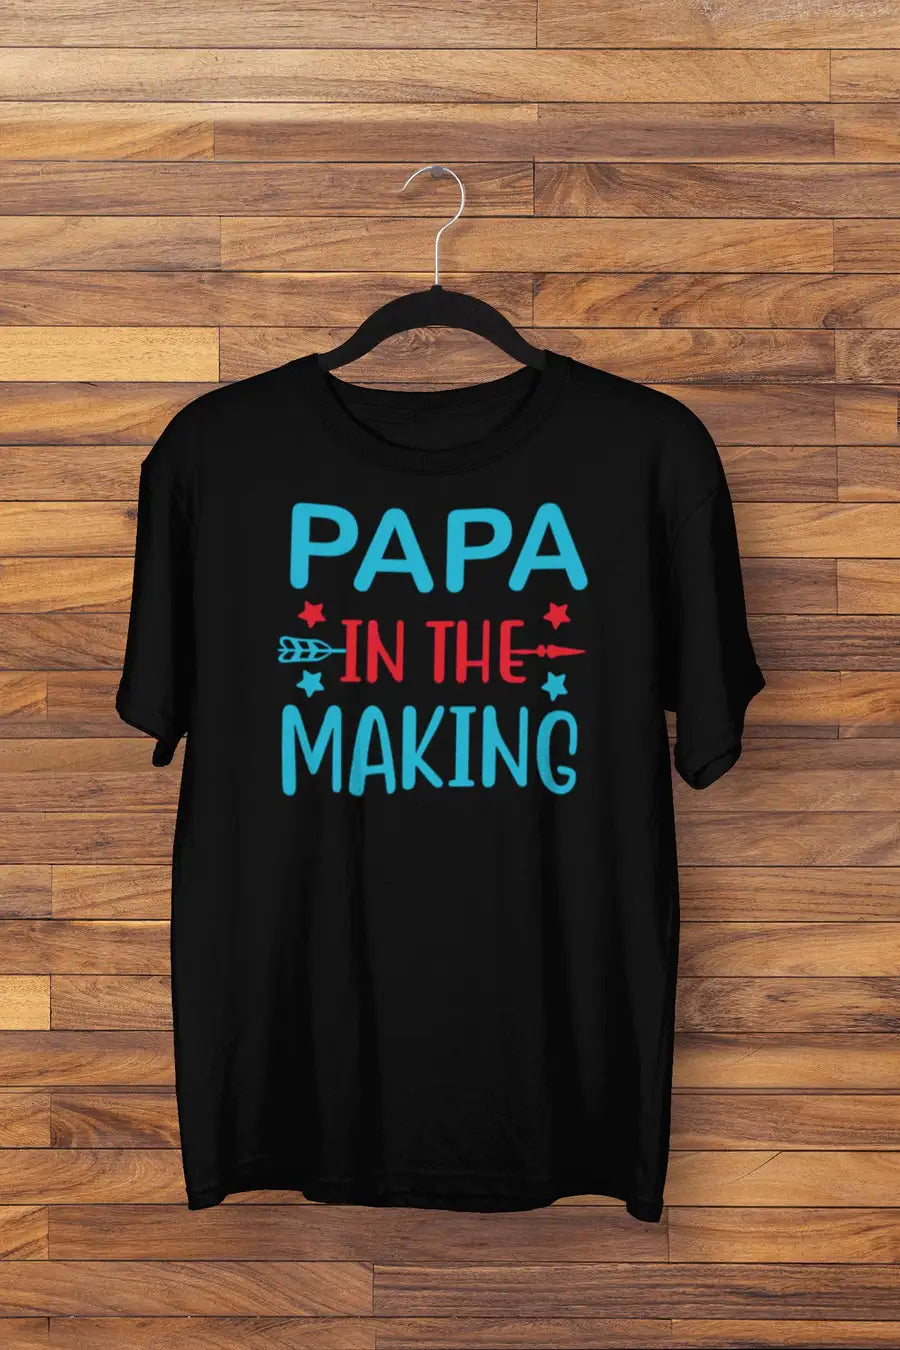 Papa in the Making Exclusive T Shirt for Men | Premium Design | Catch My Drift India - Catch My Drift India Clothing black, clothing, dad, father, made in india, parents, shirt, t shirt, tren